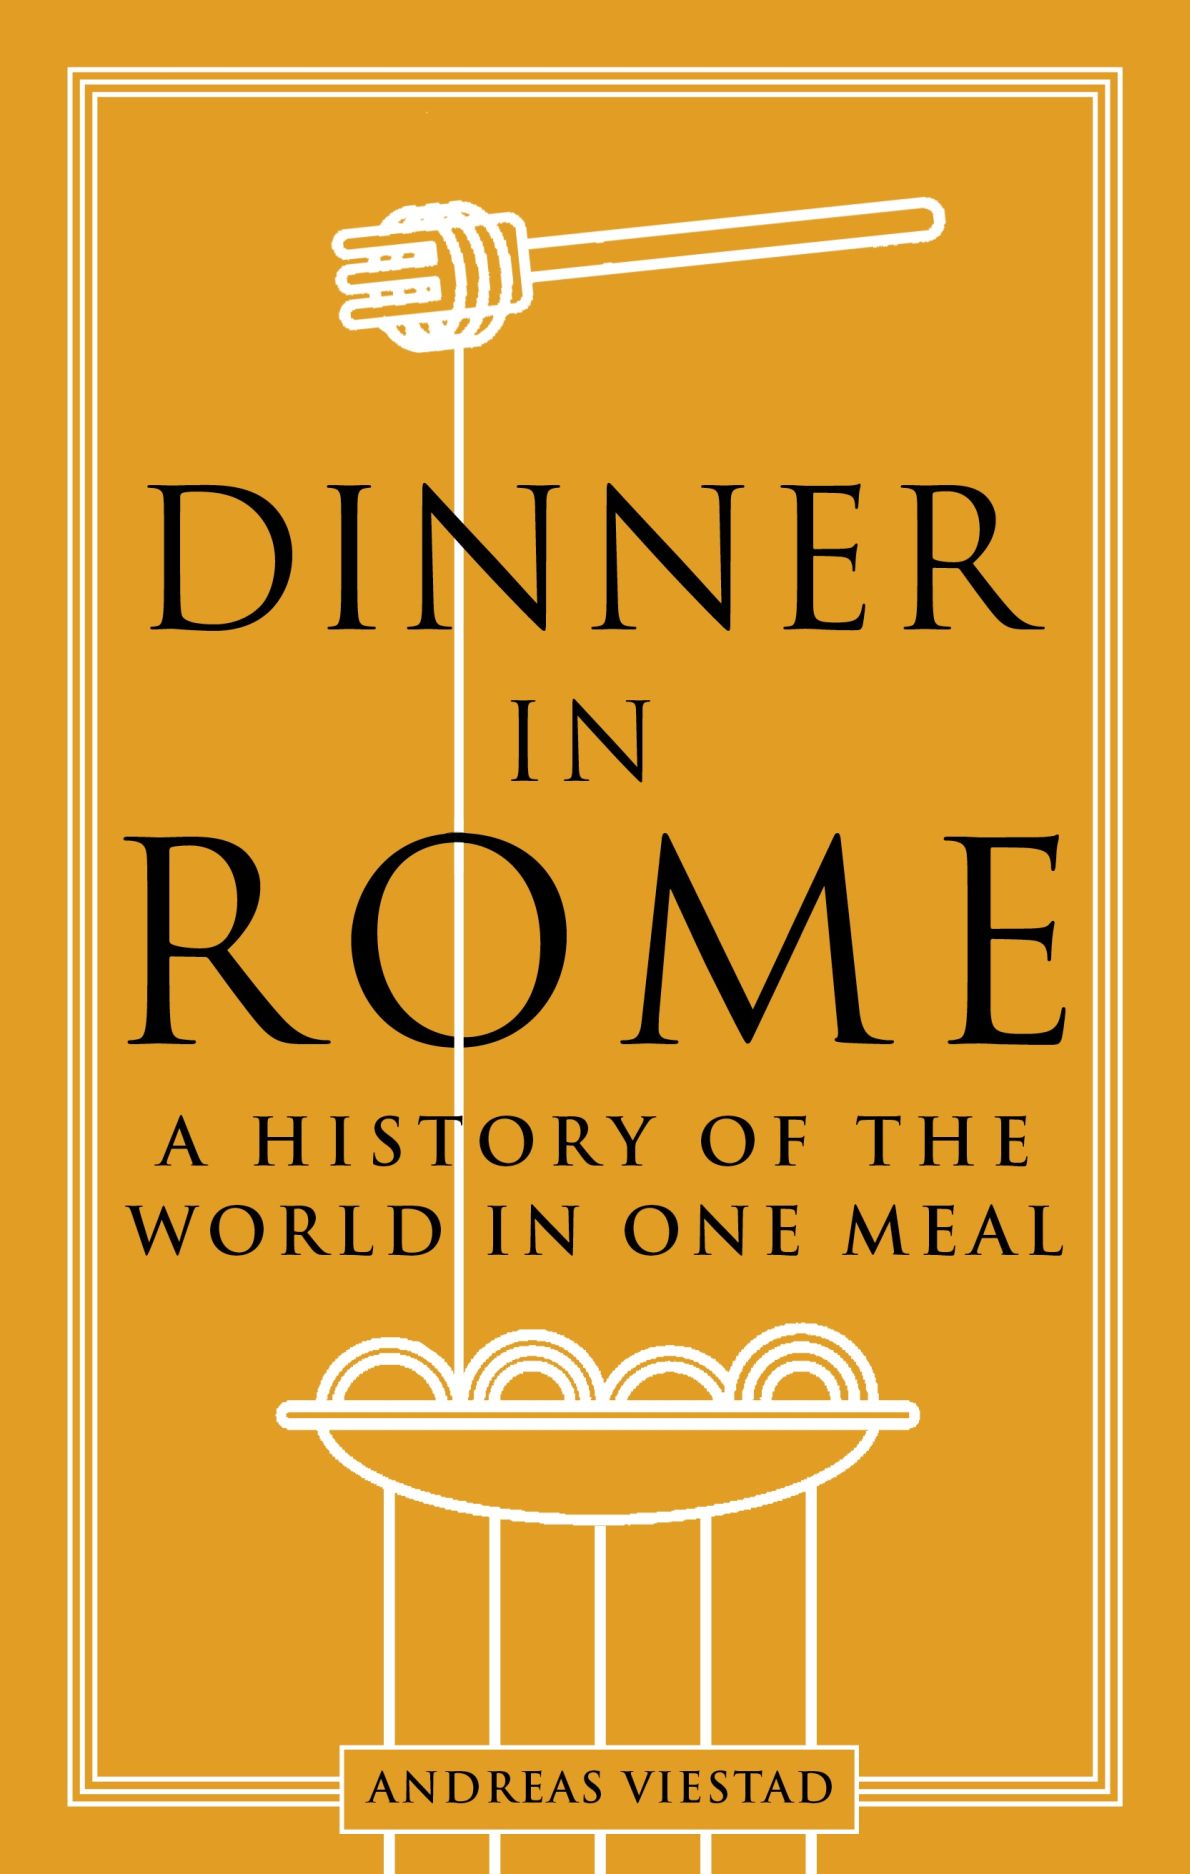 Dinner in Rome - Andreas Viestad